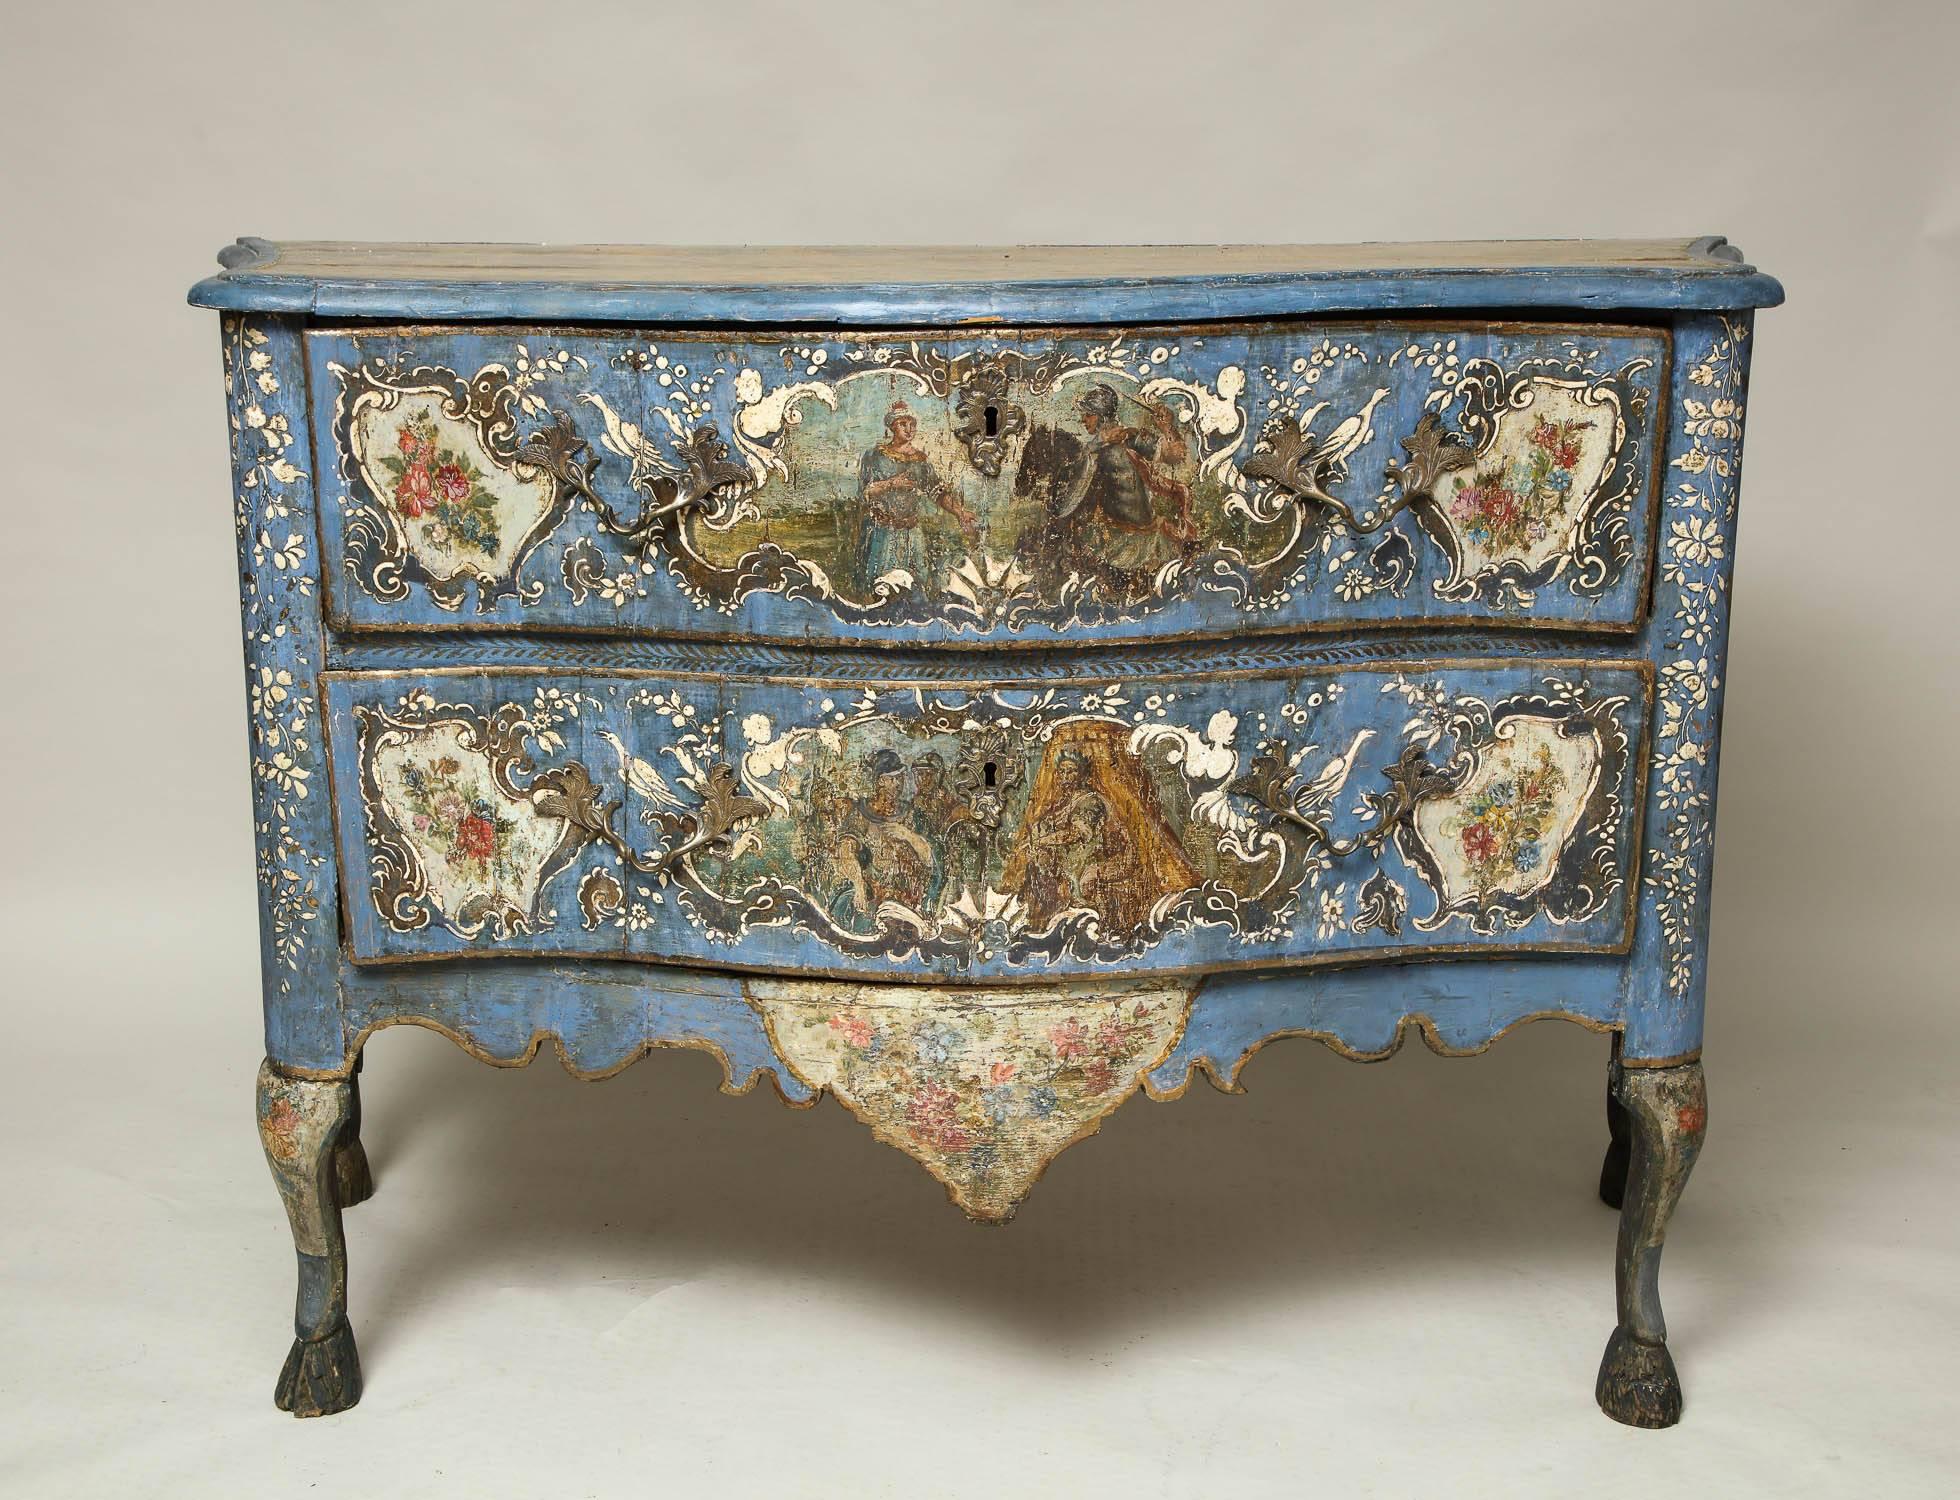 An 18th century Italian commode with serpentine front and shaped sides, having two large drawers over shaped apron standing on cabriole legs ending in hoof feet. Original contemporary figural scenes on front of drawers and sides of commode and